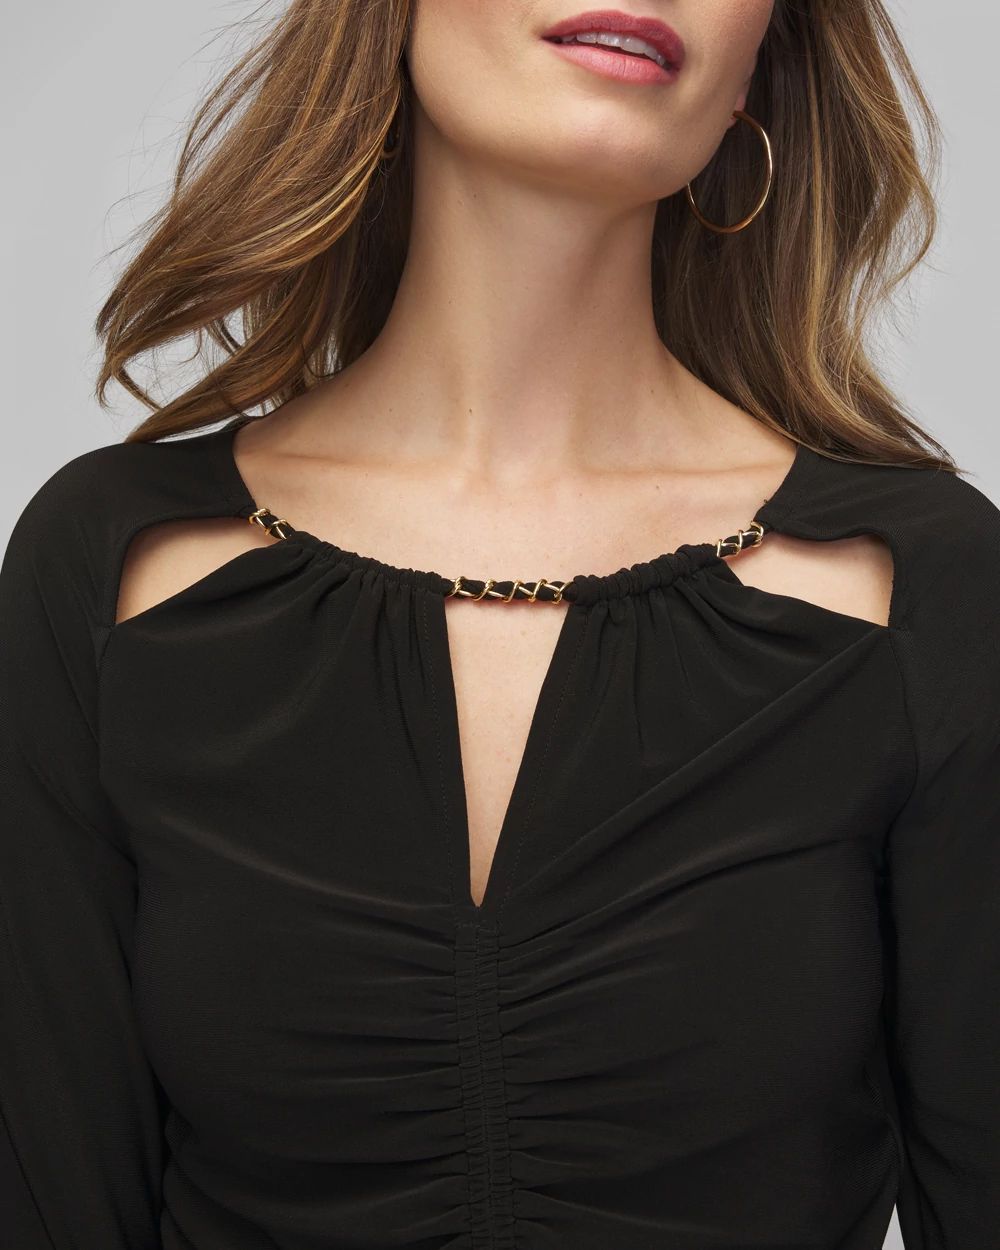 Petite Long Sleeve Ruched Chain Matte Jersey Top click to view larger image.